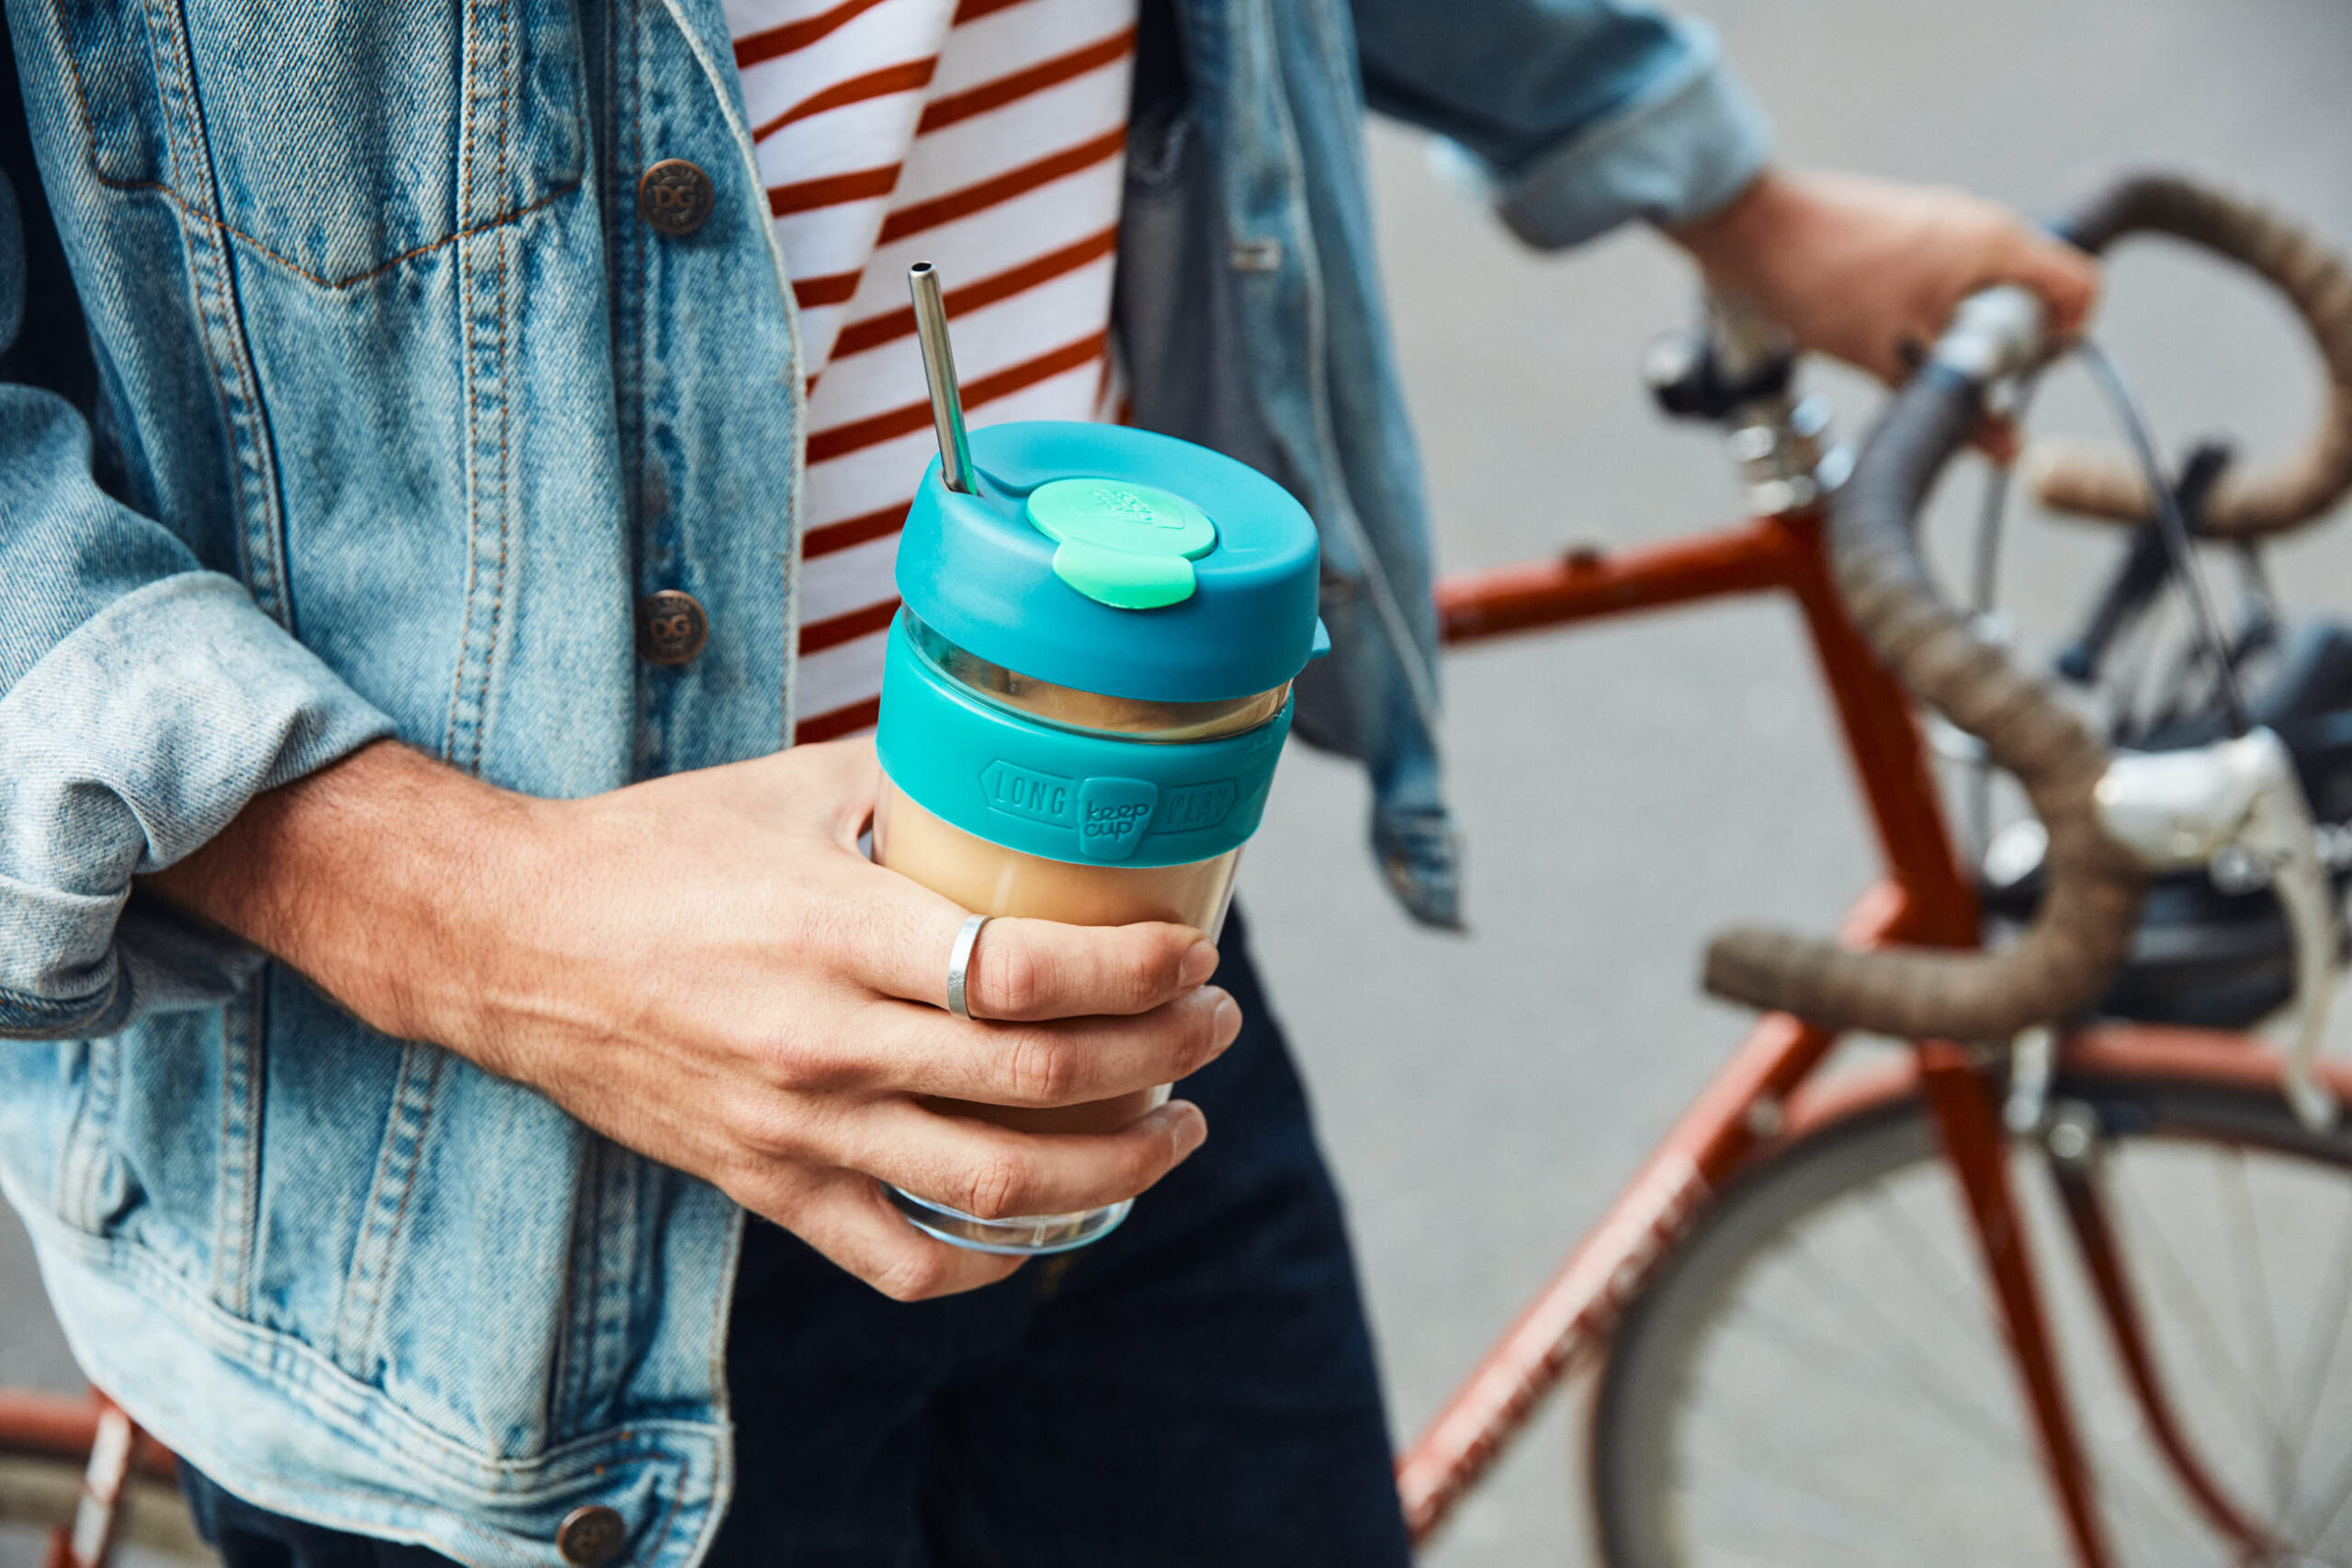 Reusable packaging is gaining a foothold in the fight against waste [Image: Person holding a reusable cup with a metal straw]